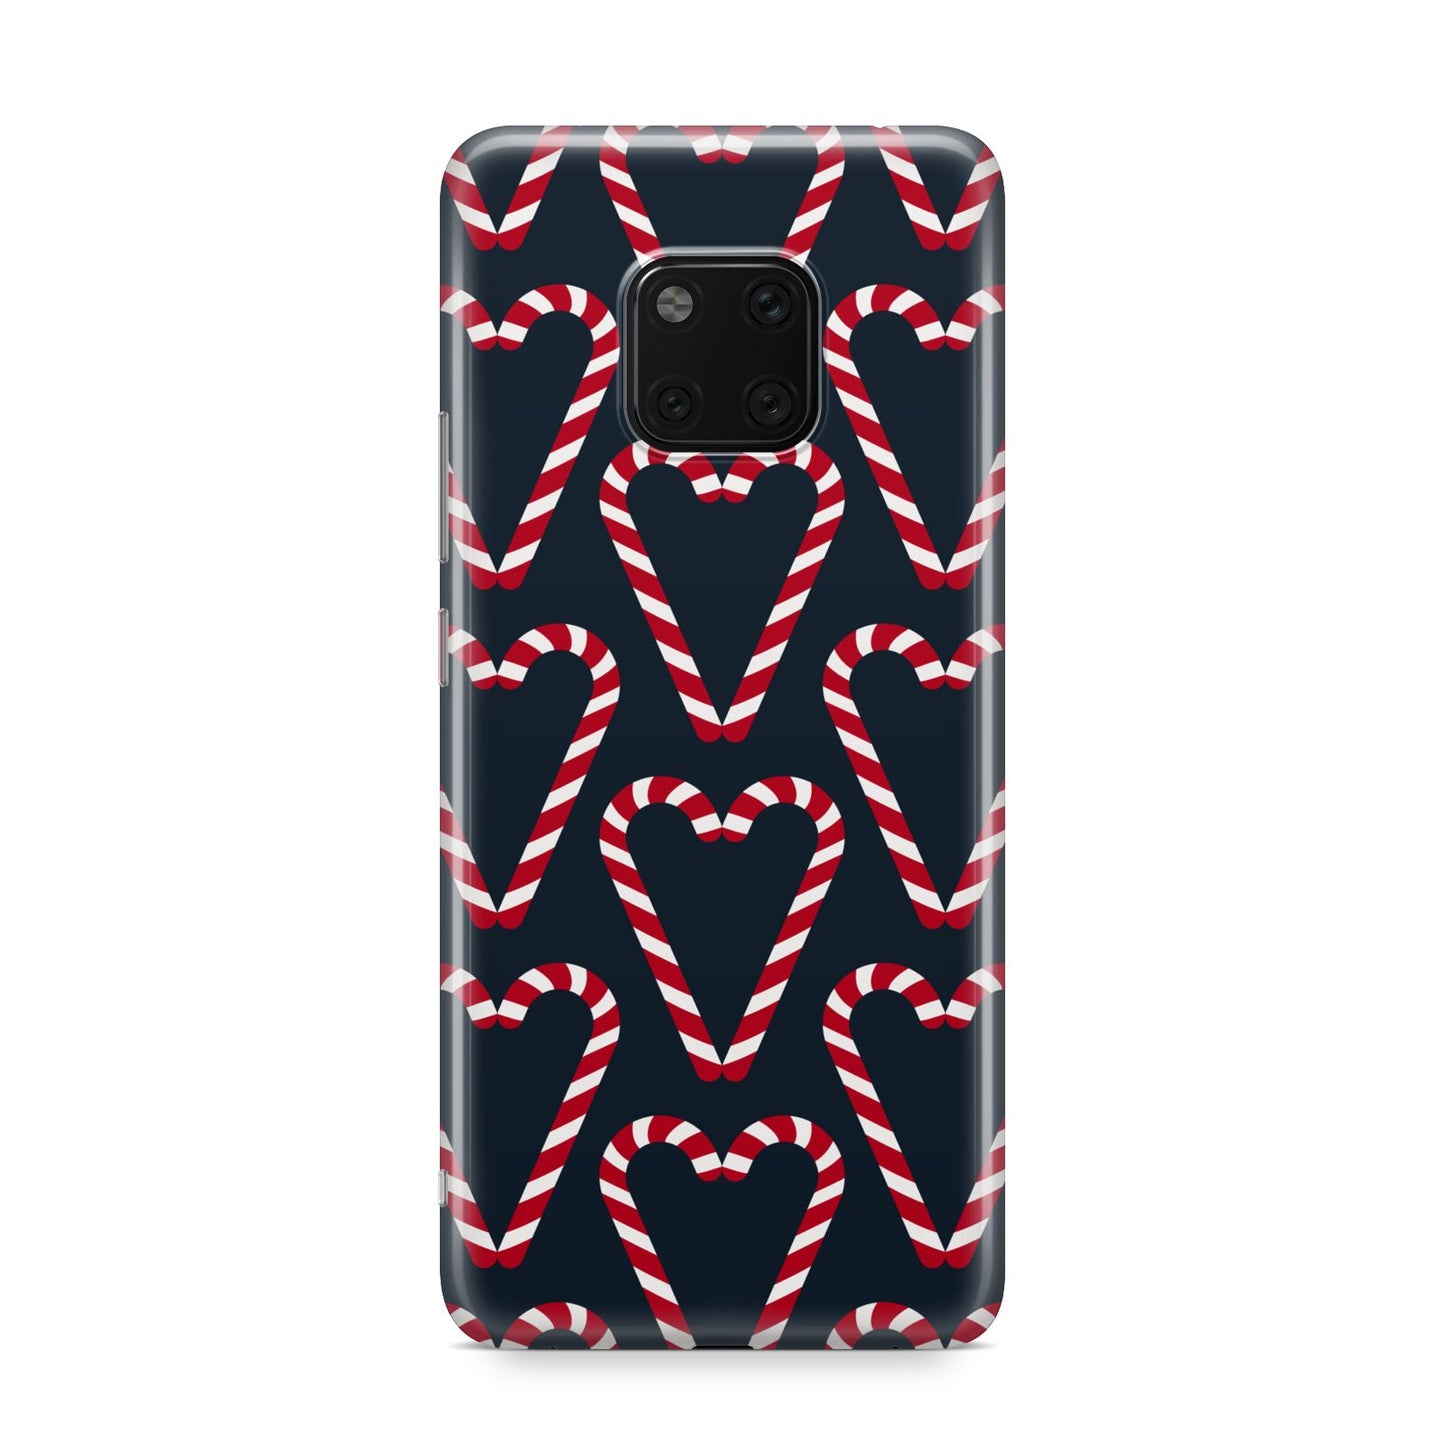 Candy Cane Pattern Huawei Mate 20 Pro Phone Case